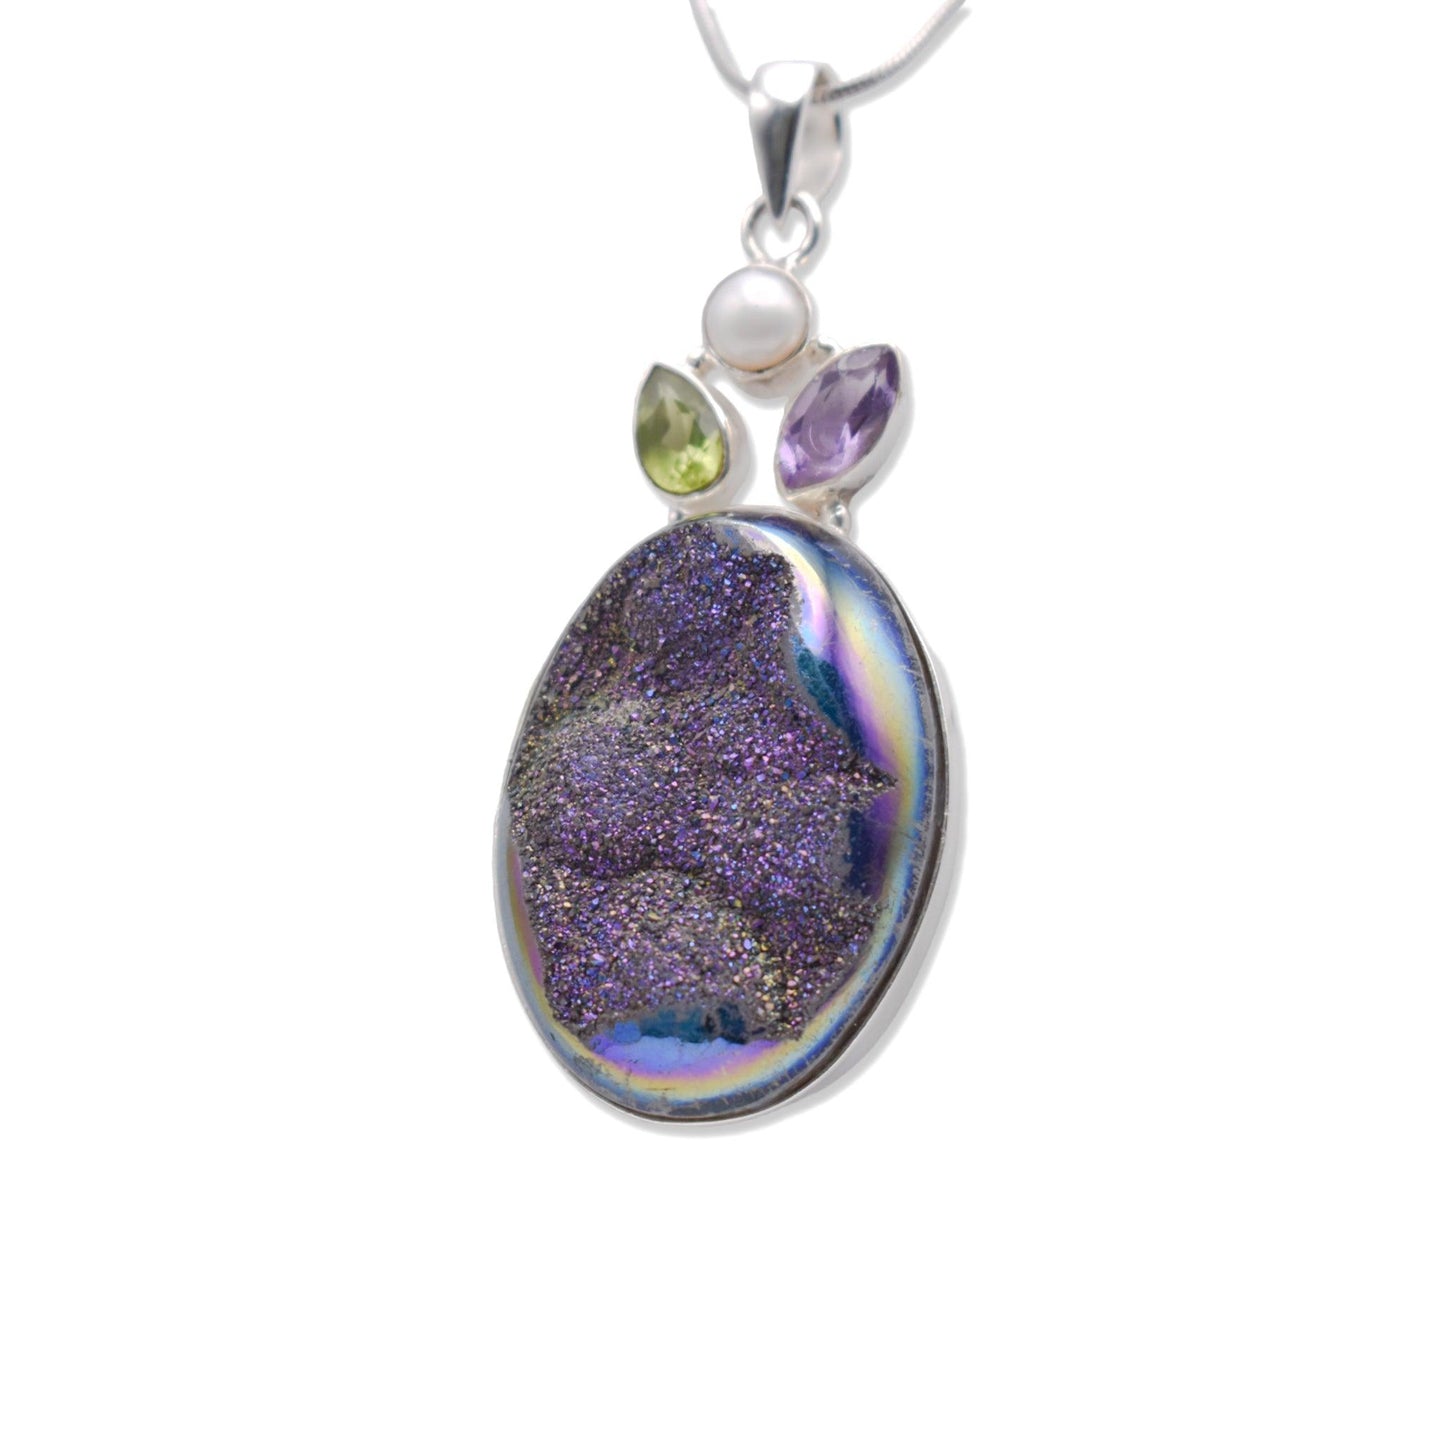 Druzy Pendant With Peridot and Amethyst with silver chain